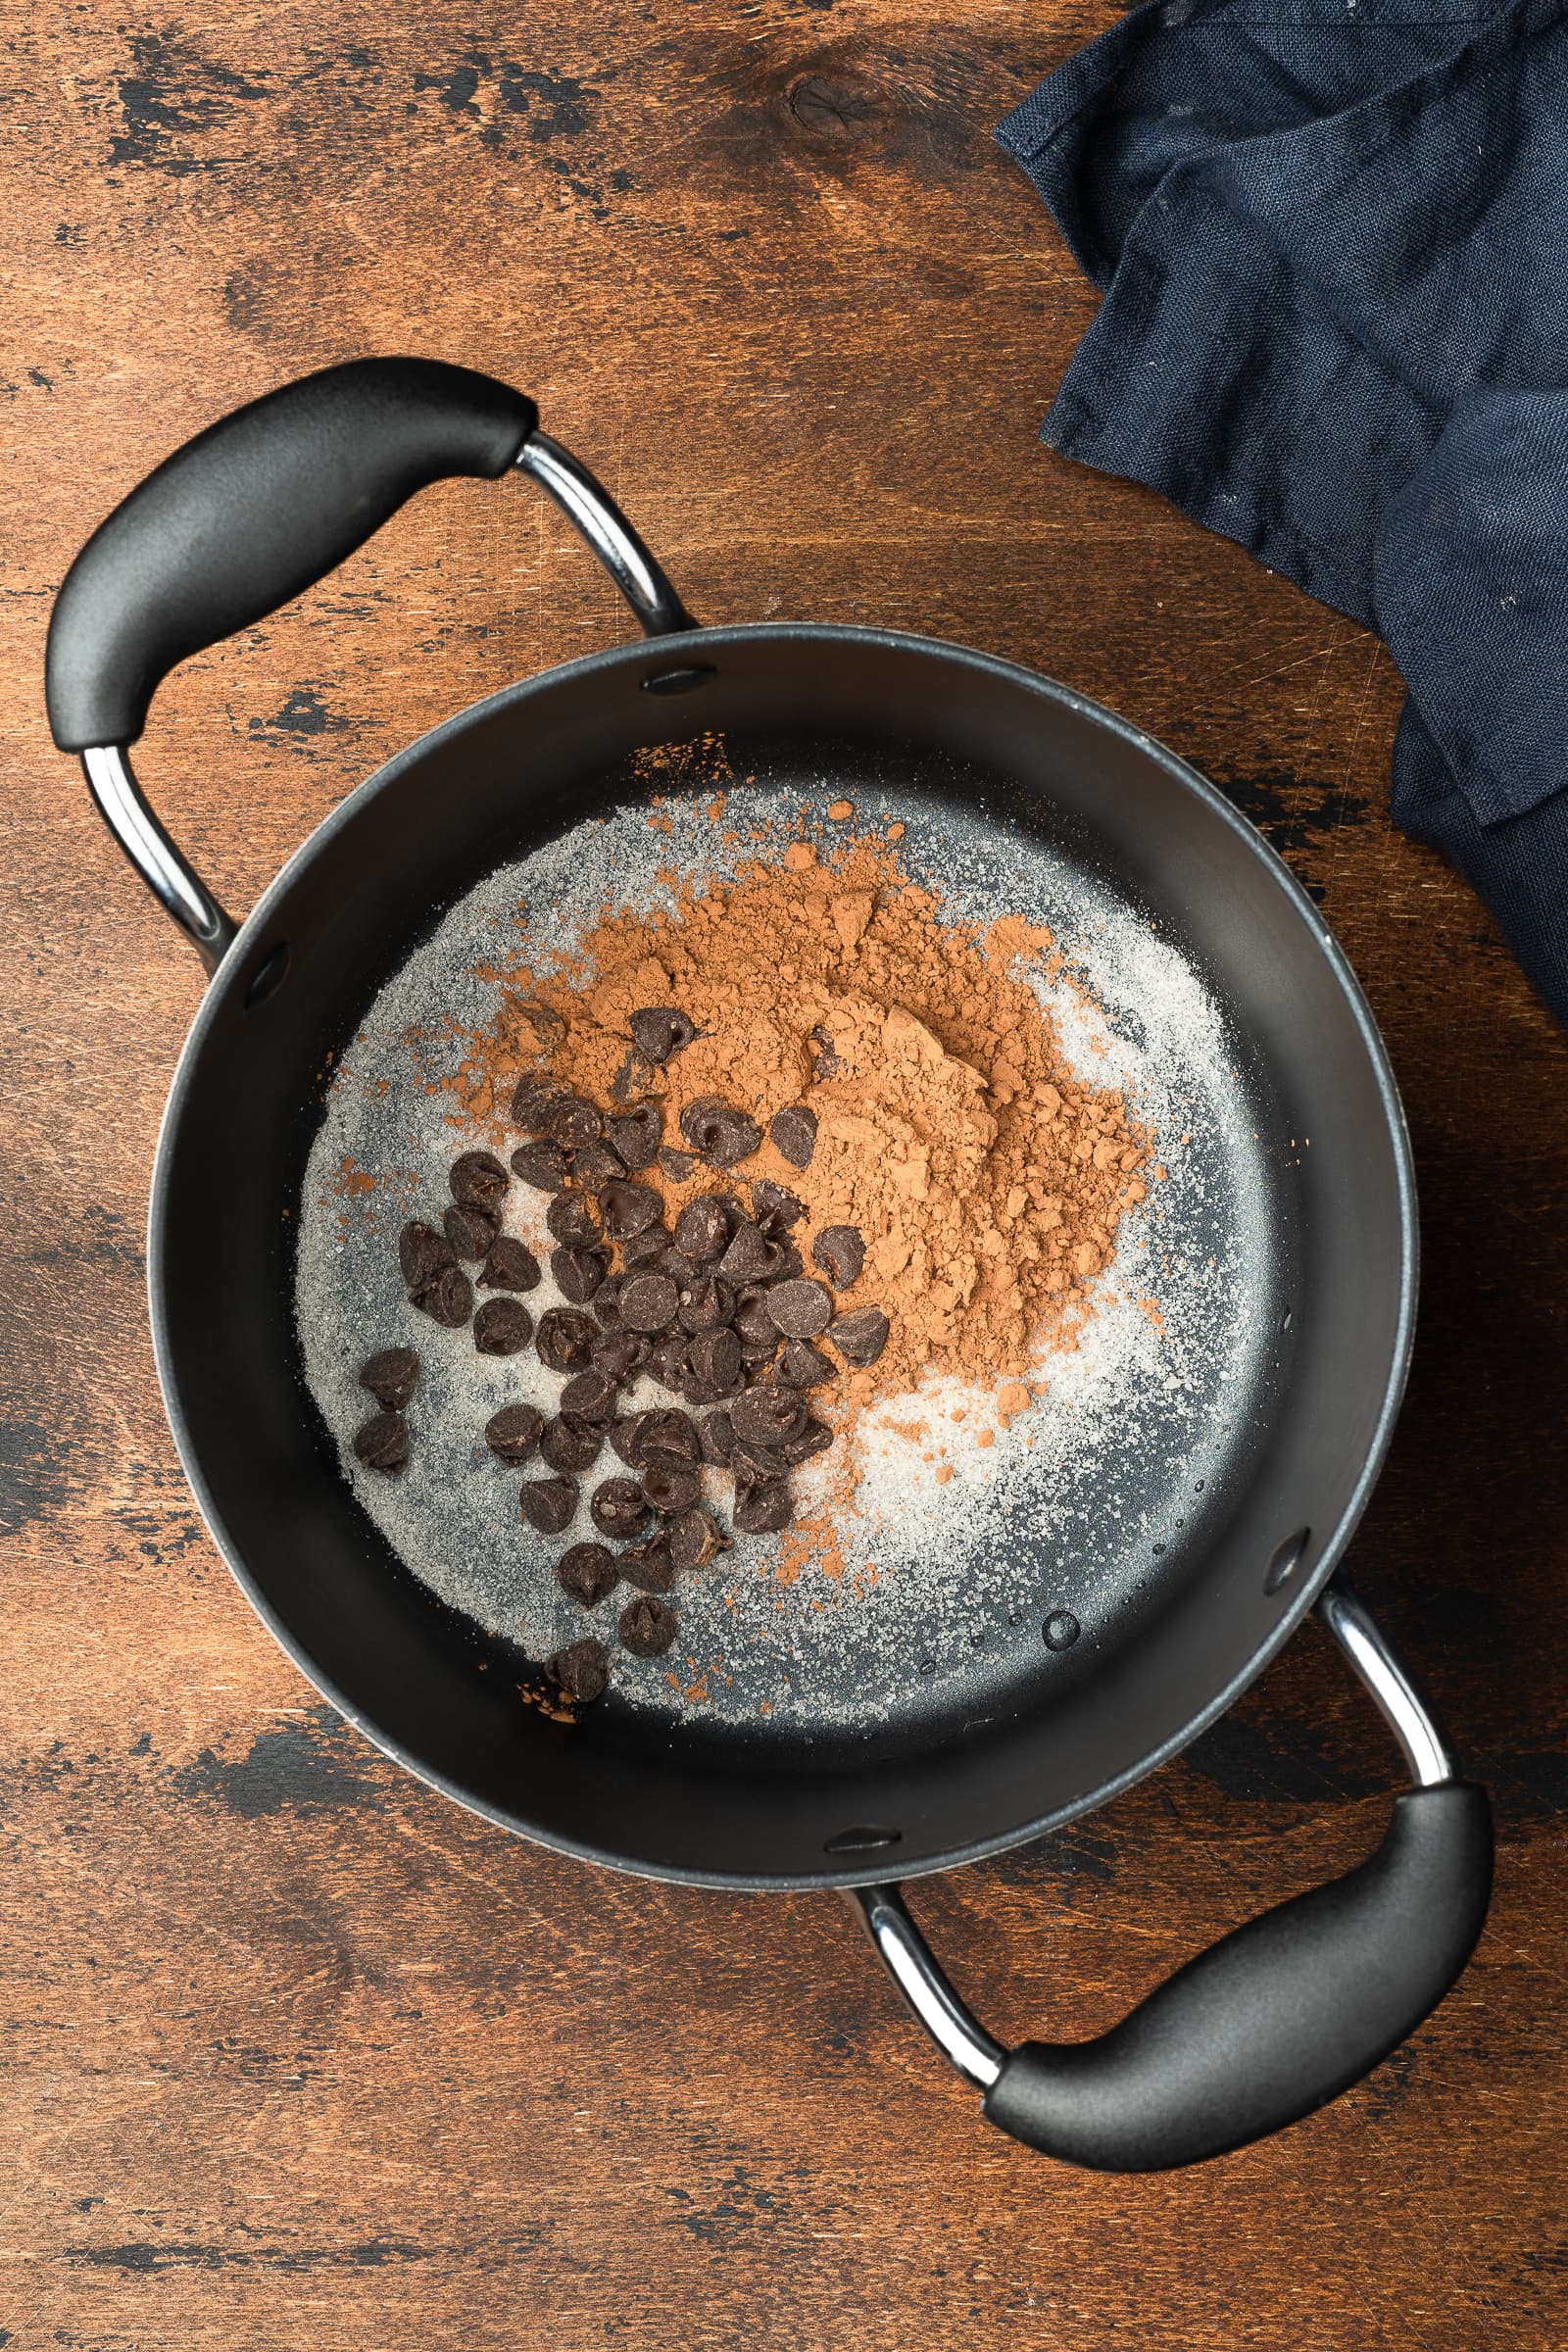 Sugar, cocoa powder, and chocolate chips in a pot.